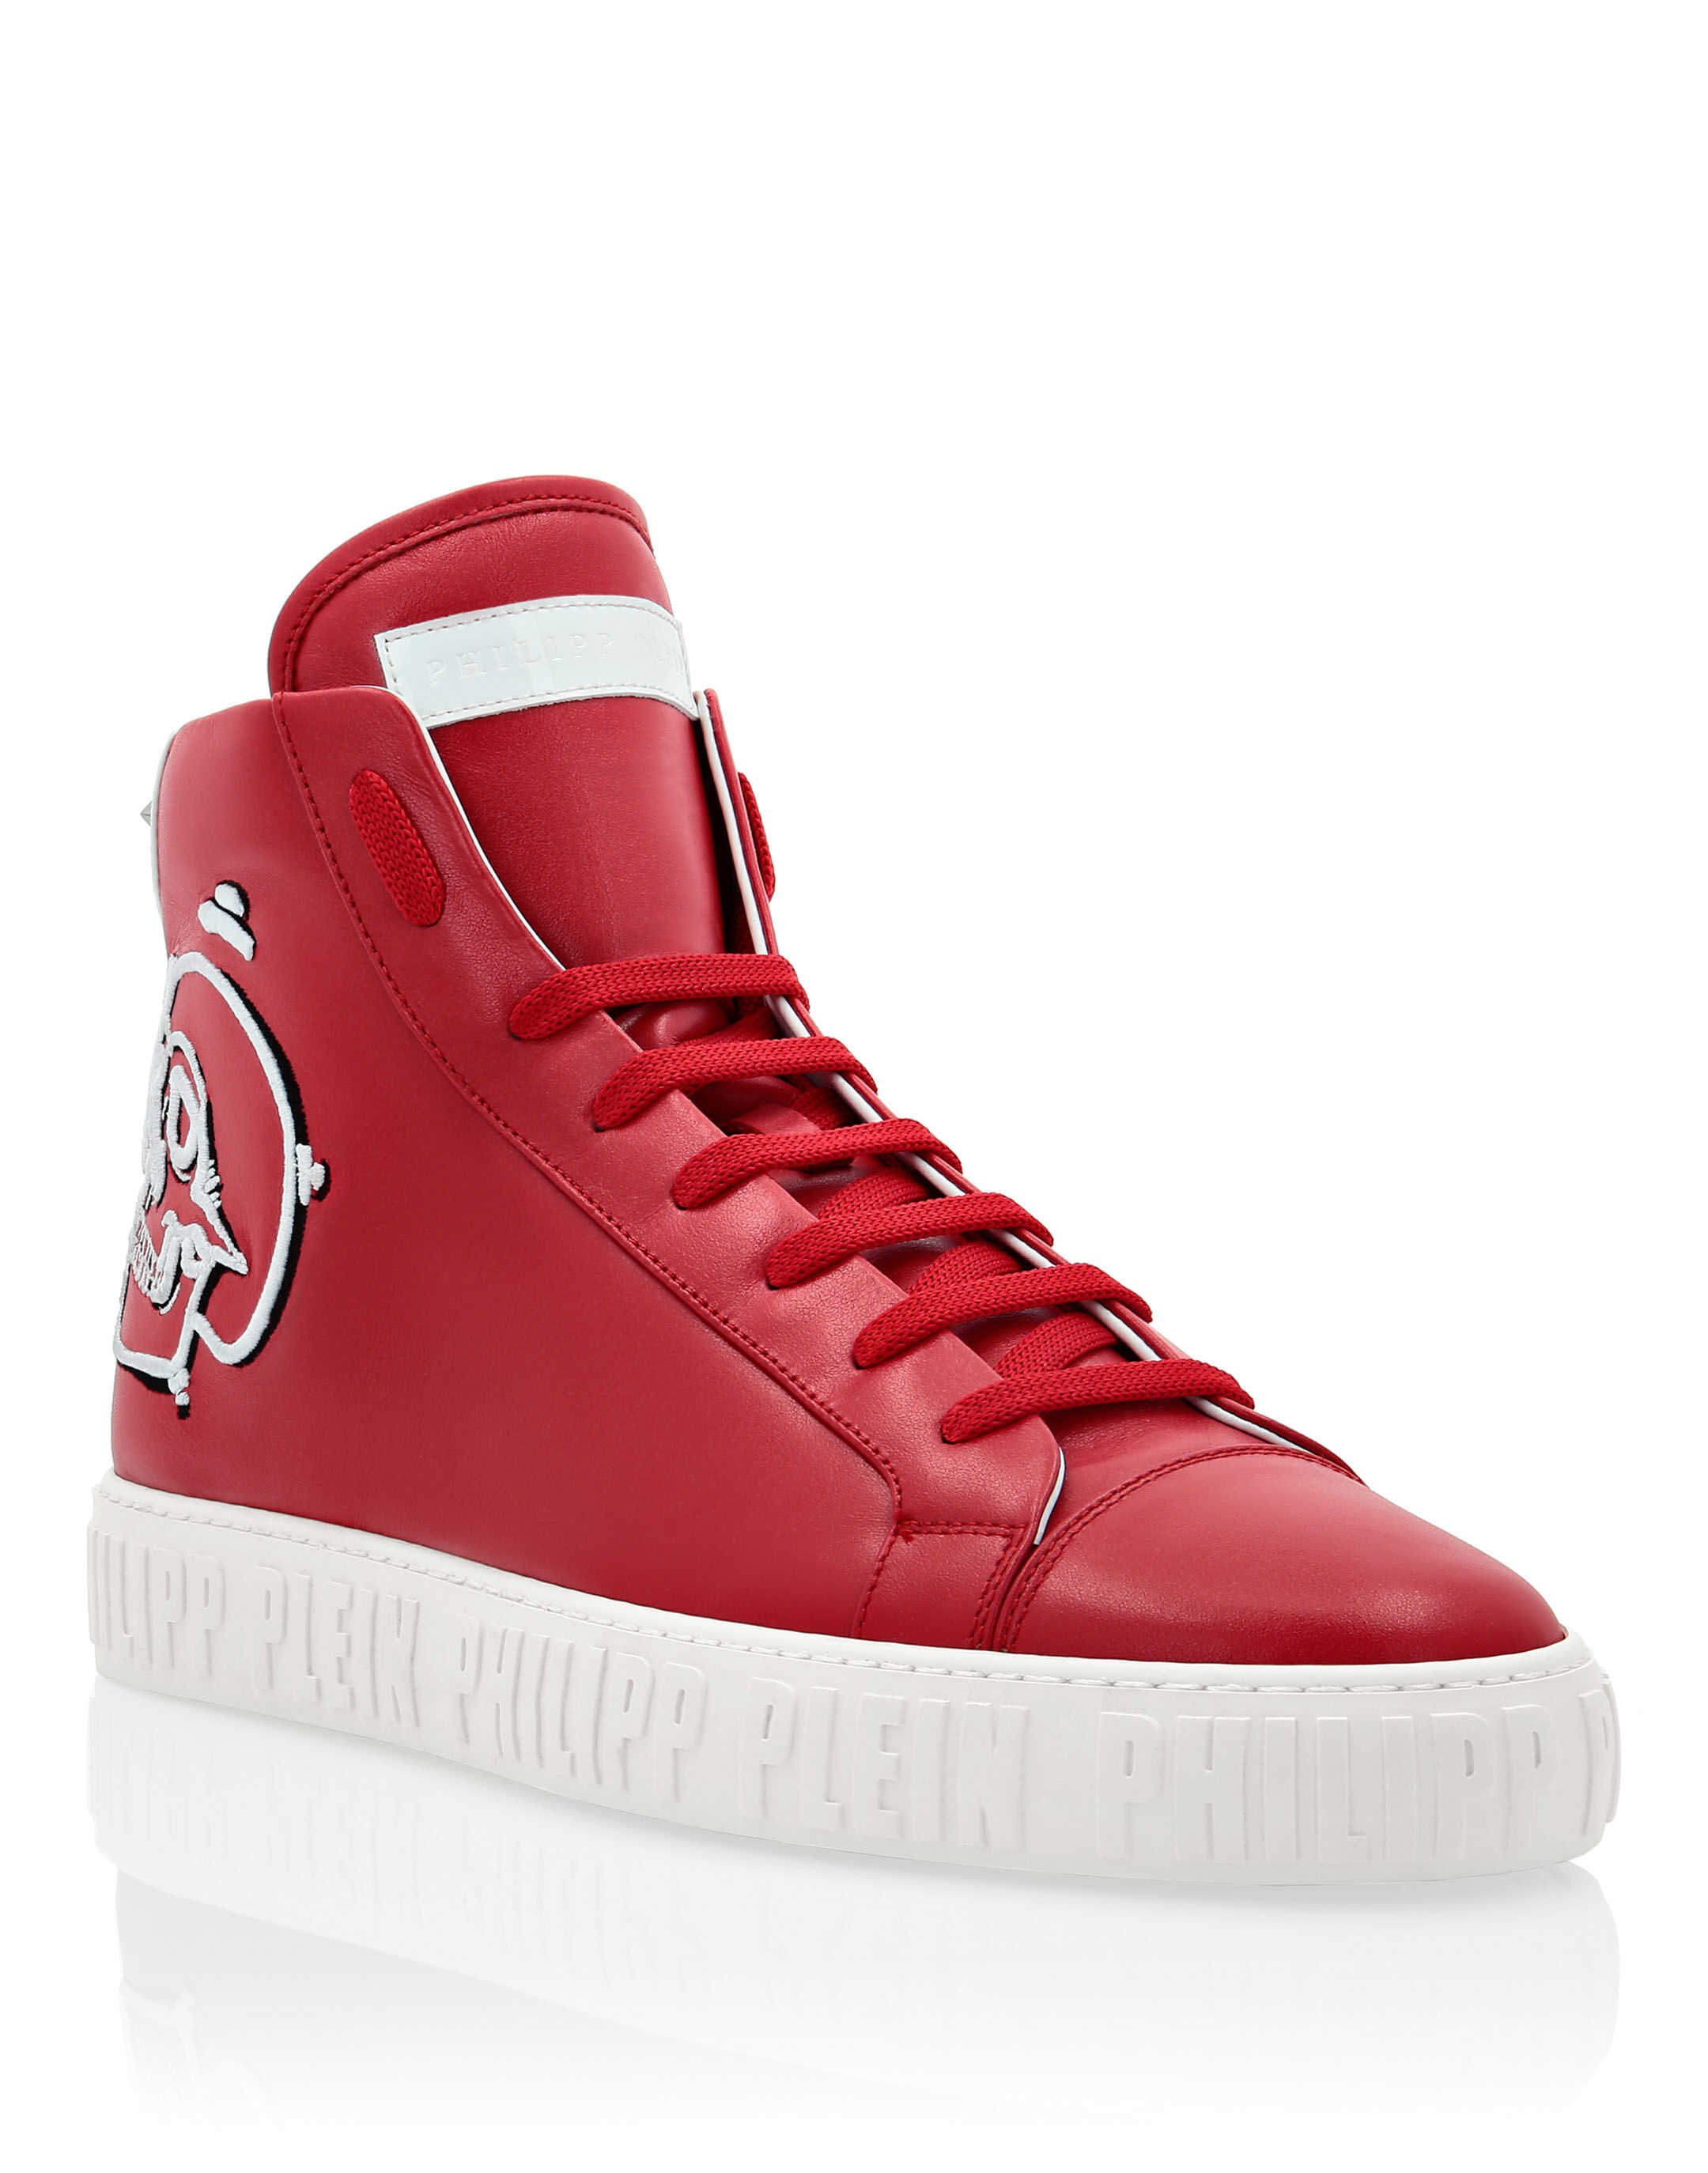 sports red shoes